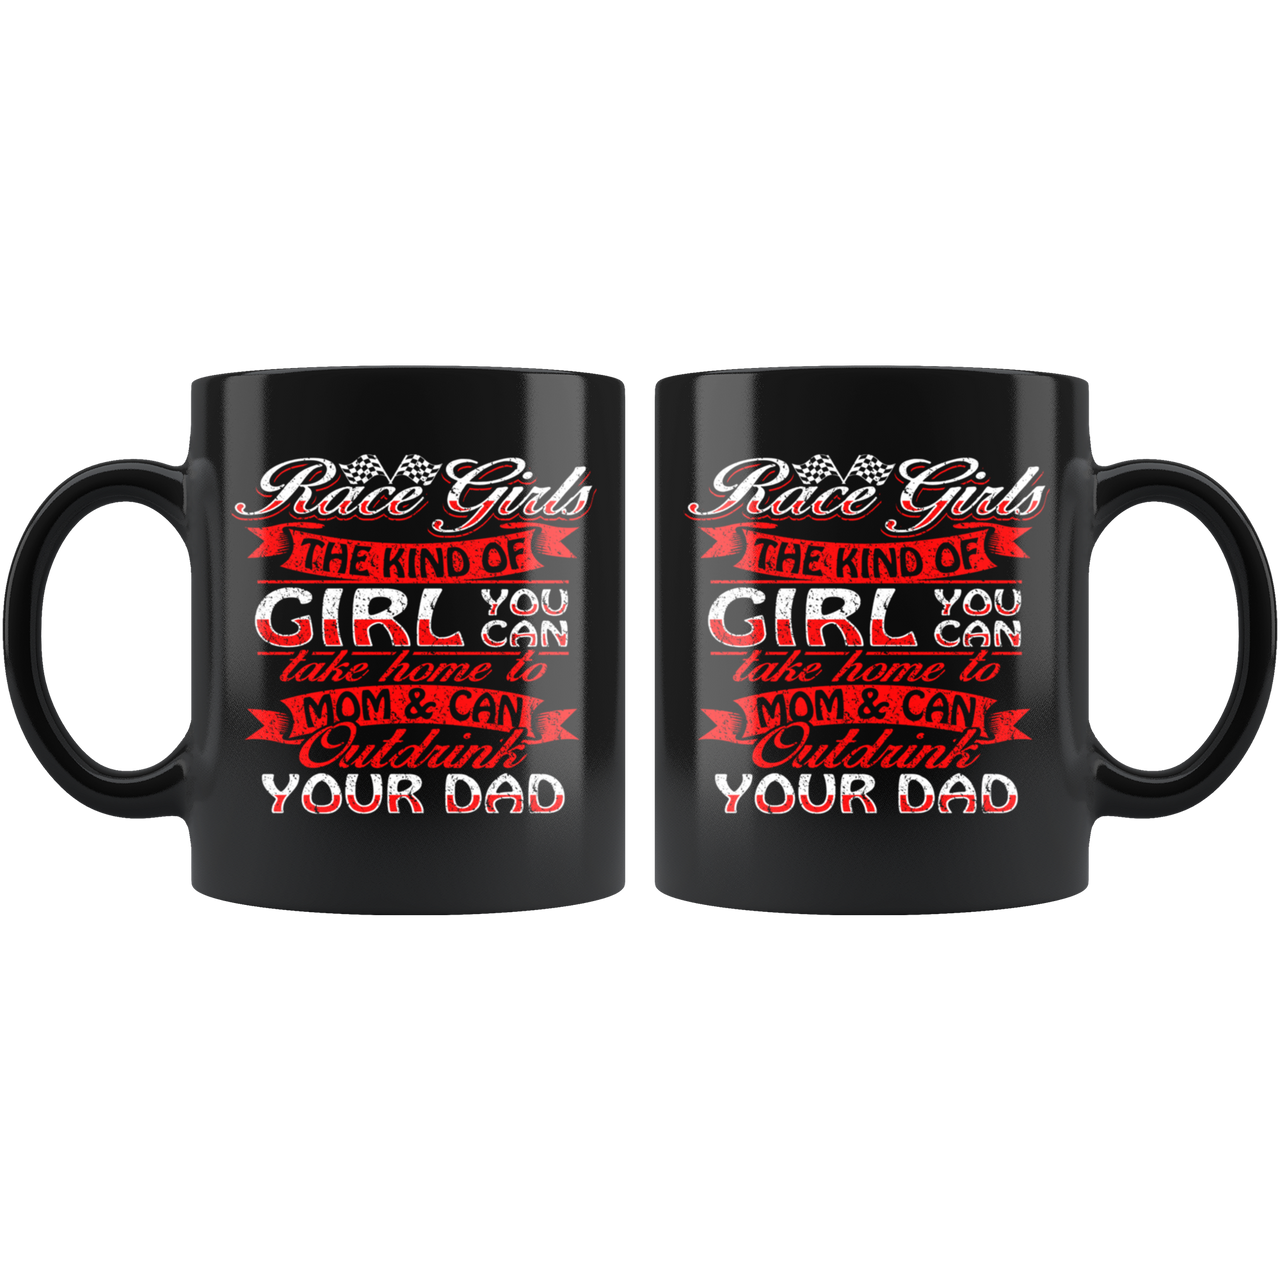 Race Girls The Kind Of Girl You Can Take Home To Mom & Can Outdrink Your Dad Mug!